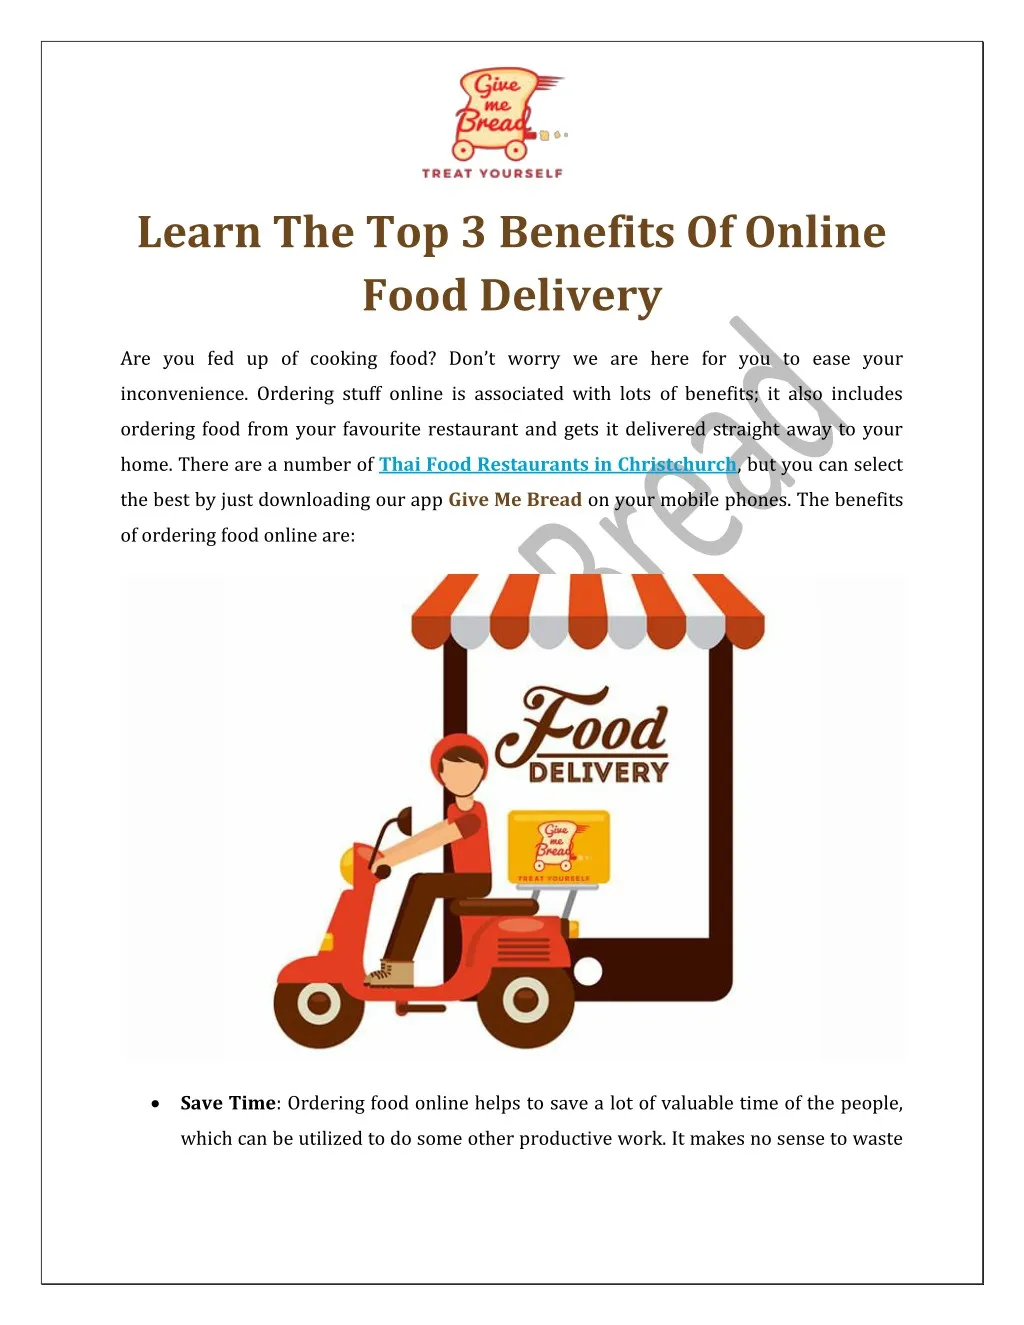 online food delivery powerpoint presentation